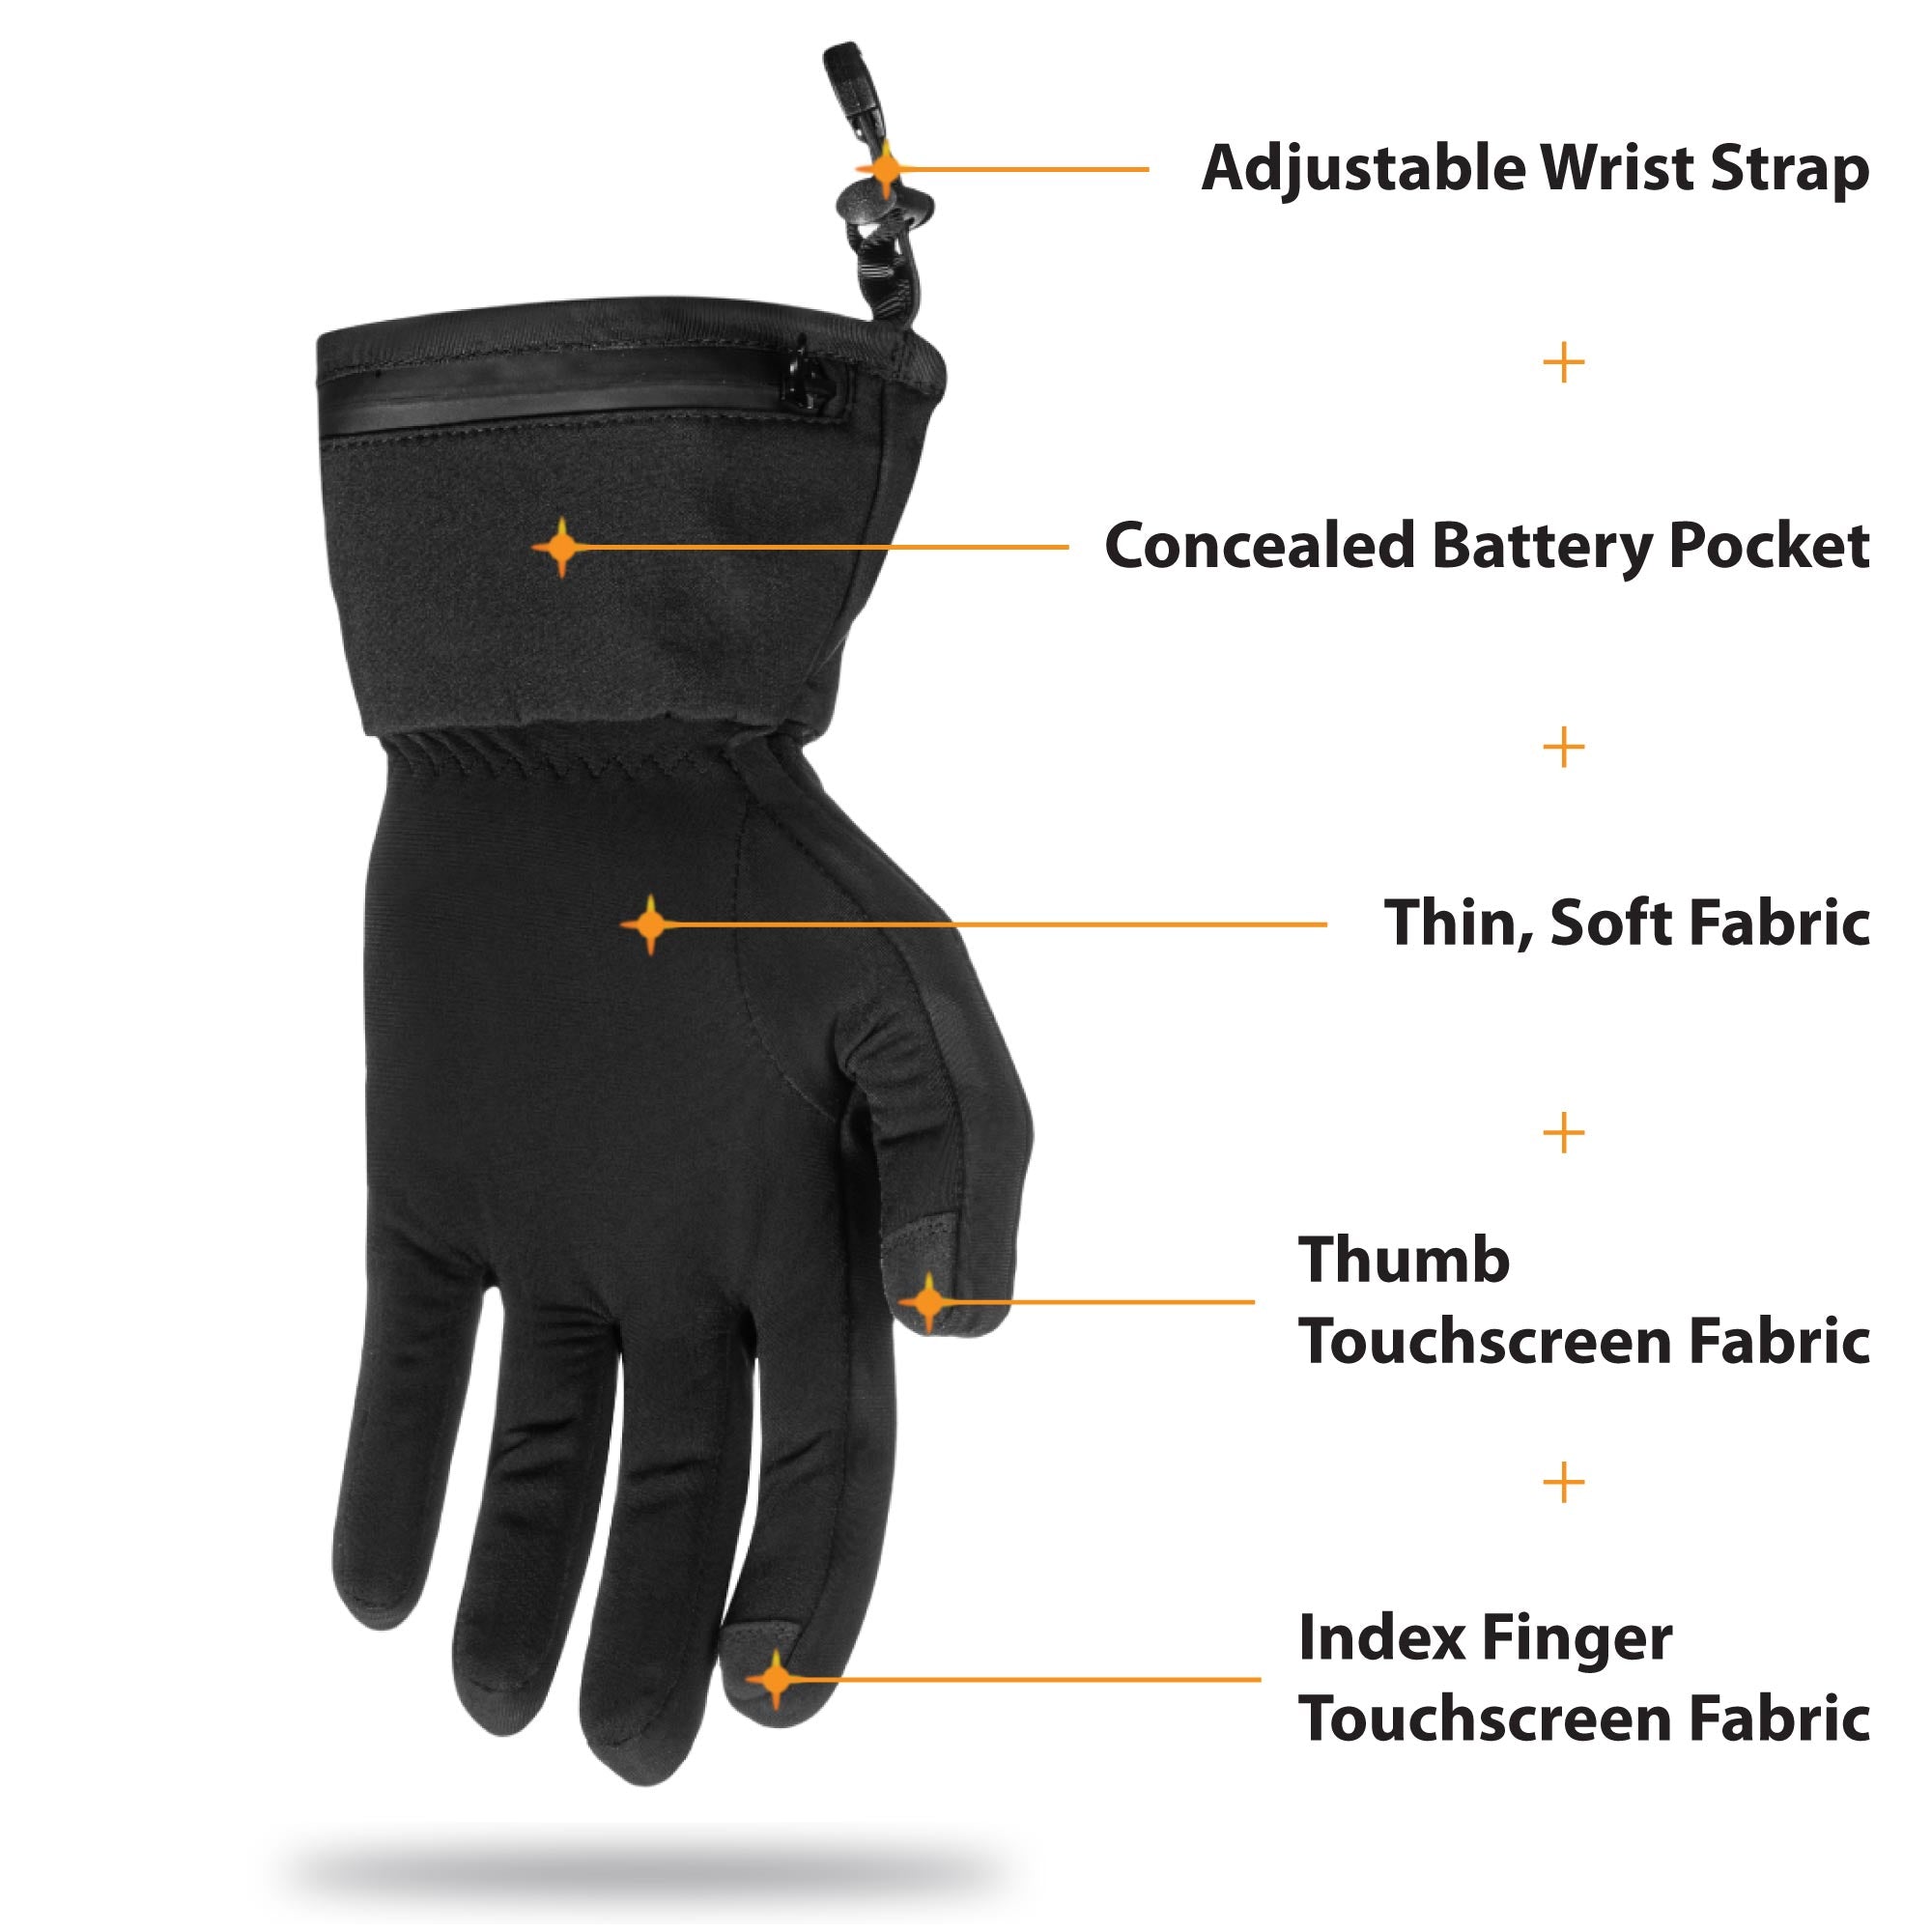 our battery powered heated gloves utilize a thin flexible battery that fits in a hidden pocket to maximize comfort.  thin and soft fabrics are comfortable and touchscreen fabrics on the fingertips make it easy to use your devices.